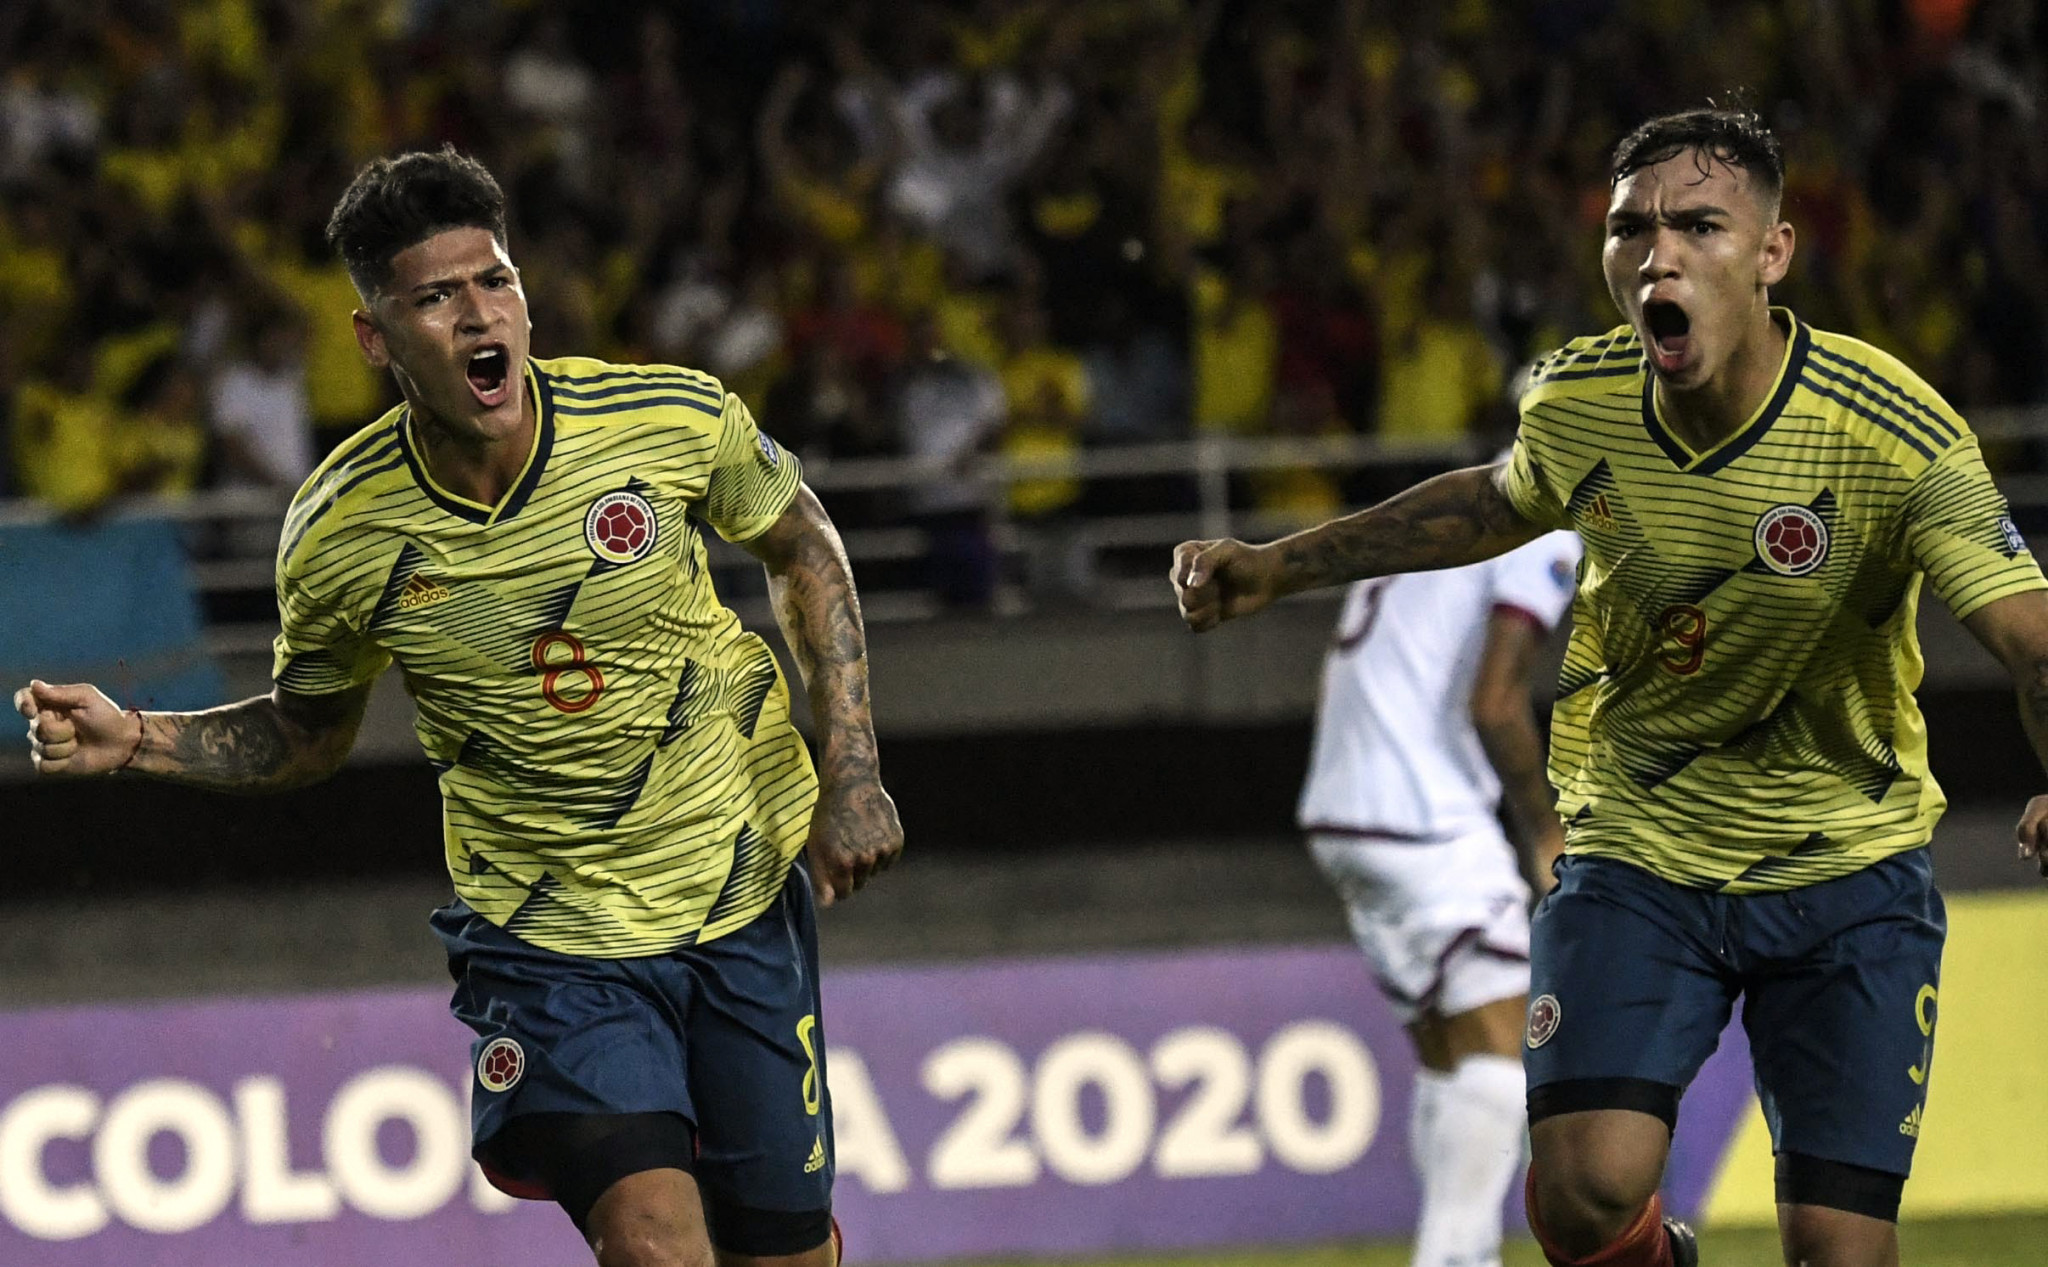 Hosts Colombia came from behind to secure an important win over Venezuela ©Getty Images